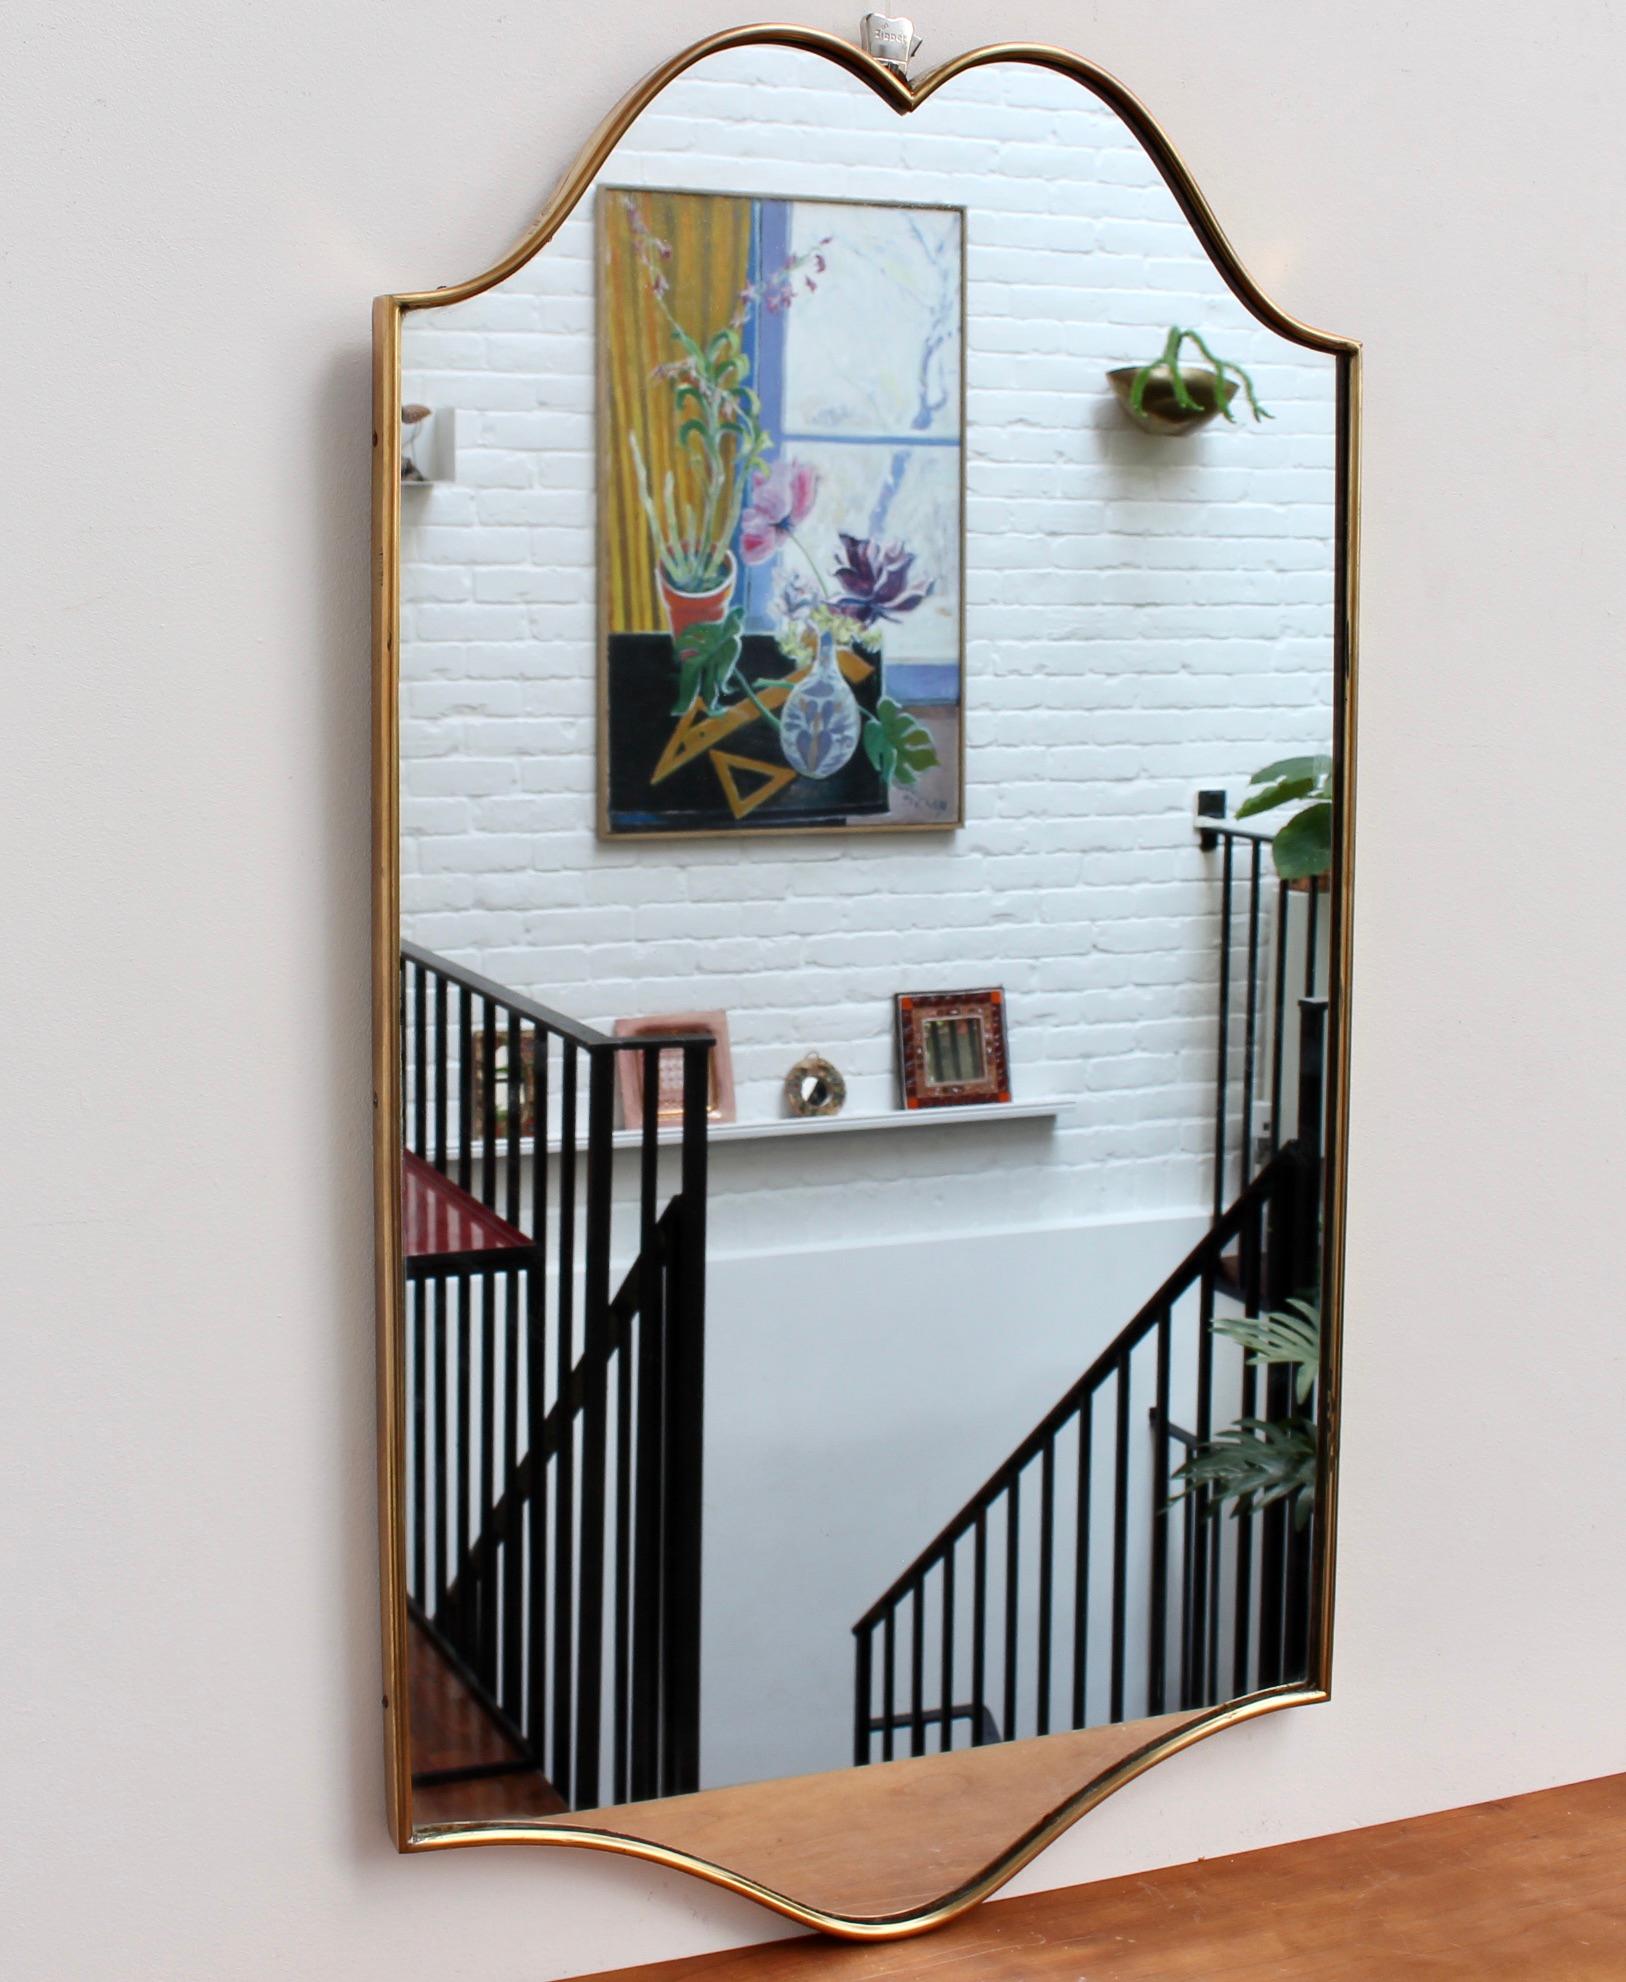 Midccentury Italian wall mirror with brass frame (circa 1950s). The mirror sports ruggedly straight lines accented on both top and bottom by sensuous curves -classically elegant and distinctive in a modern Gio Ponti style. This mirror is in good